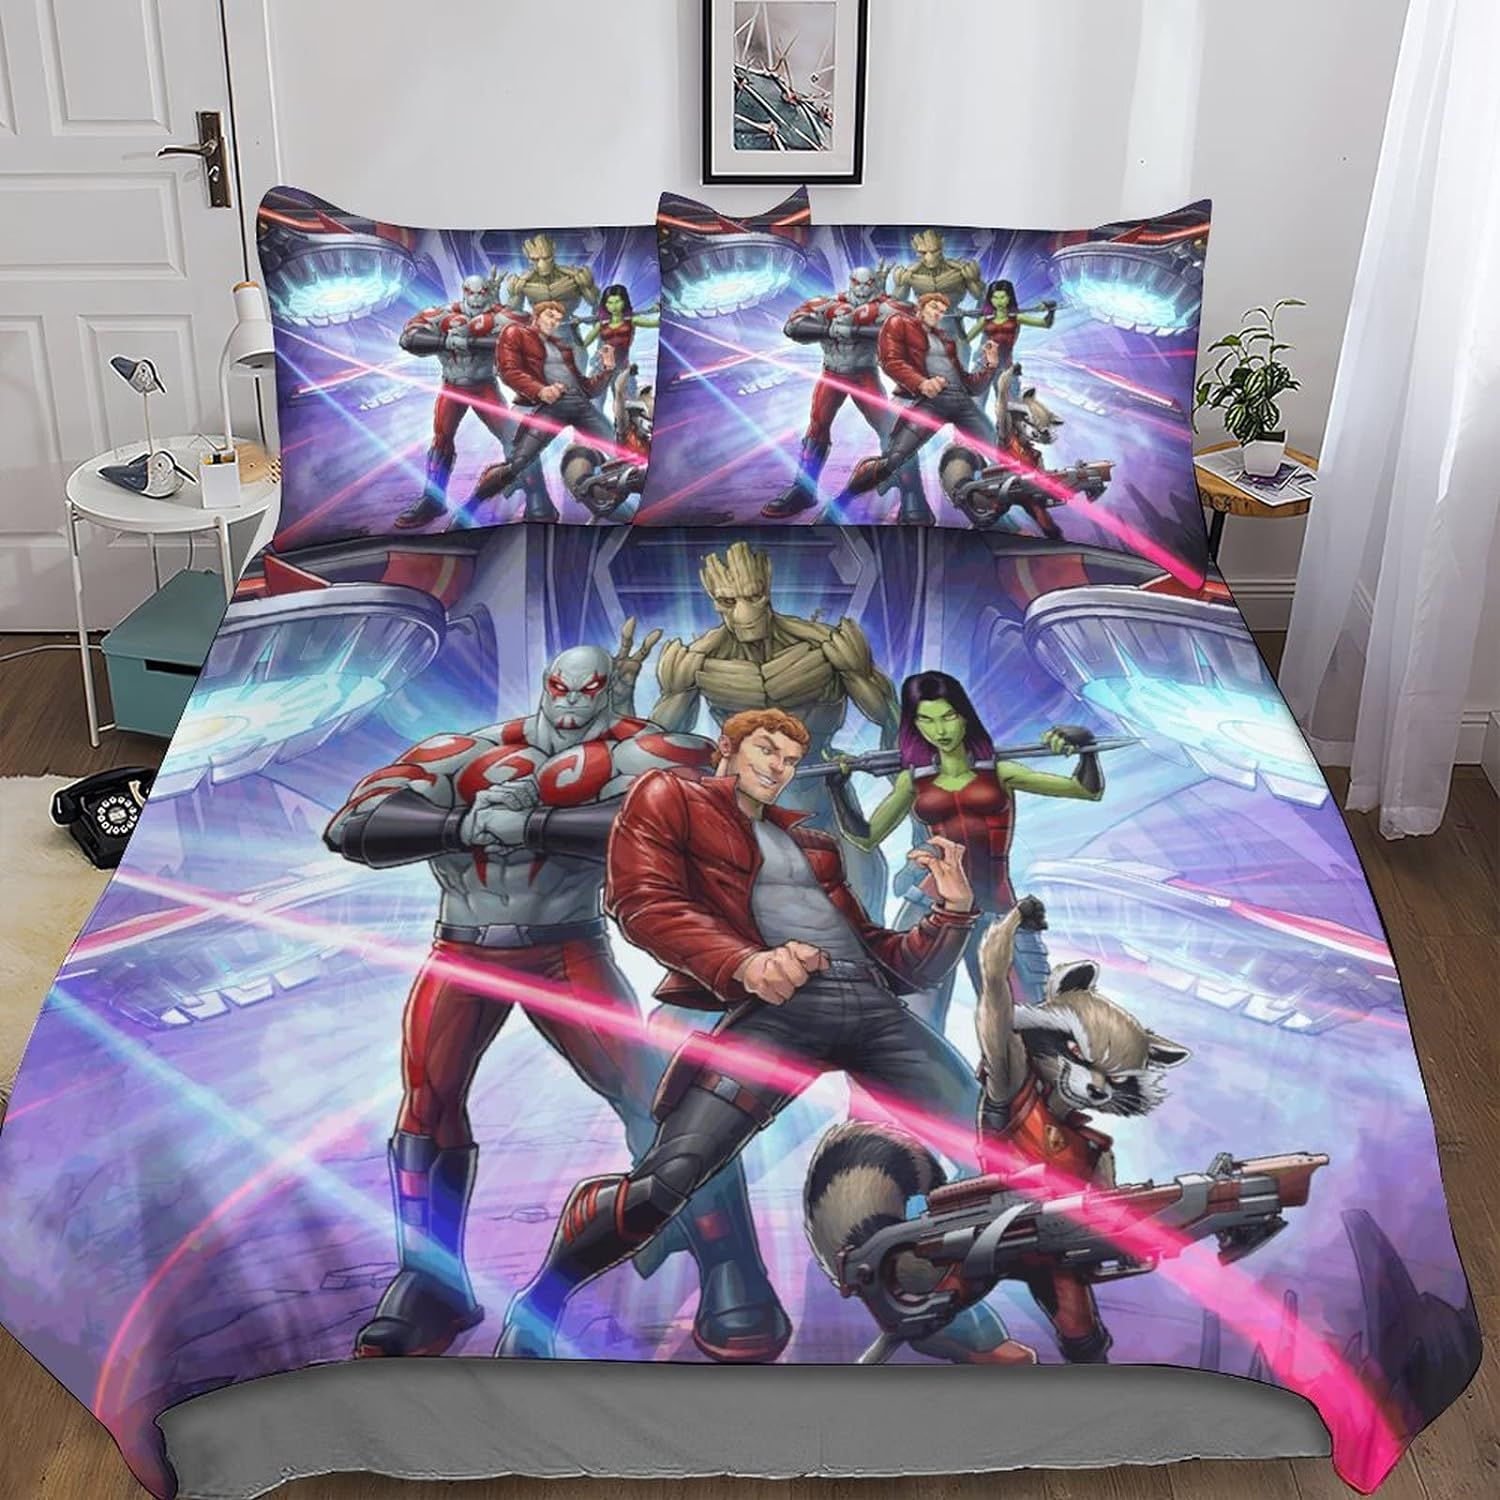 Guardians-Of-The-Galaxy-Rocket-Raccoon-Gamora-Groot-Marvel-Comics-Others-15817 Duvet Cover 3 Piece Set One-Sided Pattern Bedding